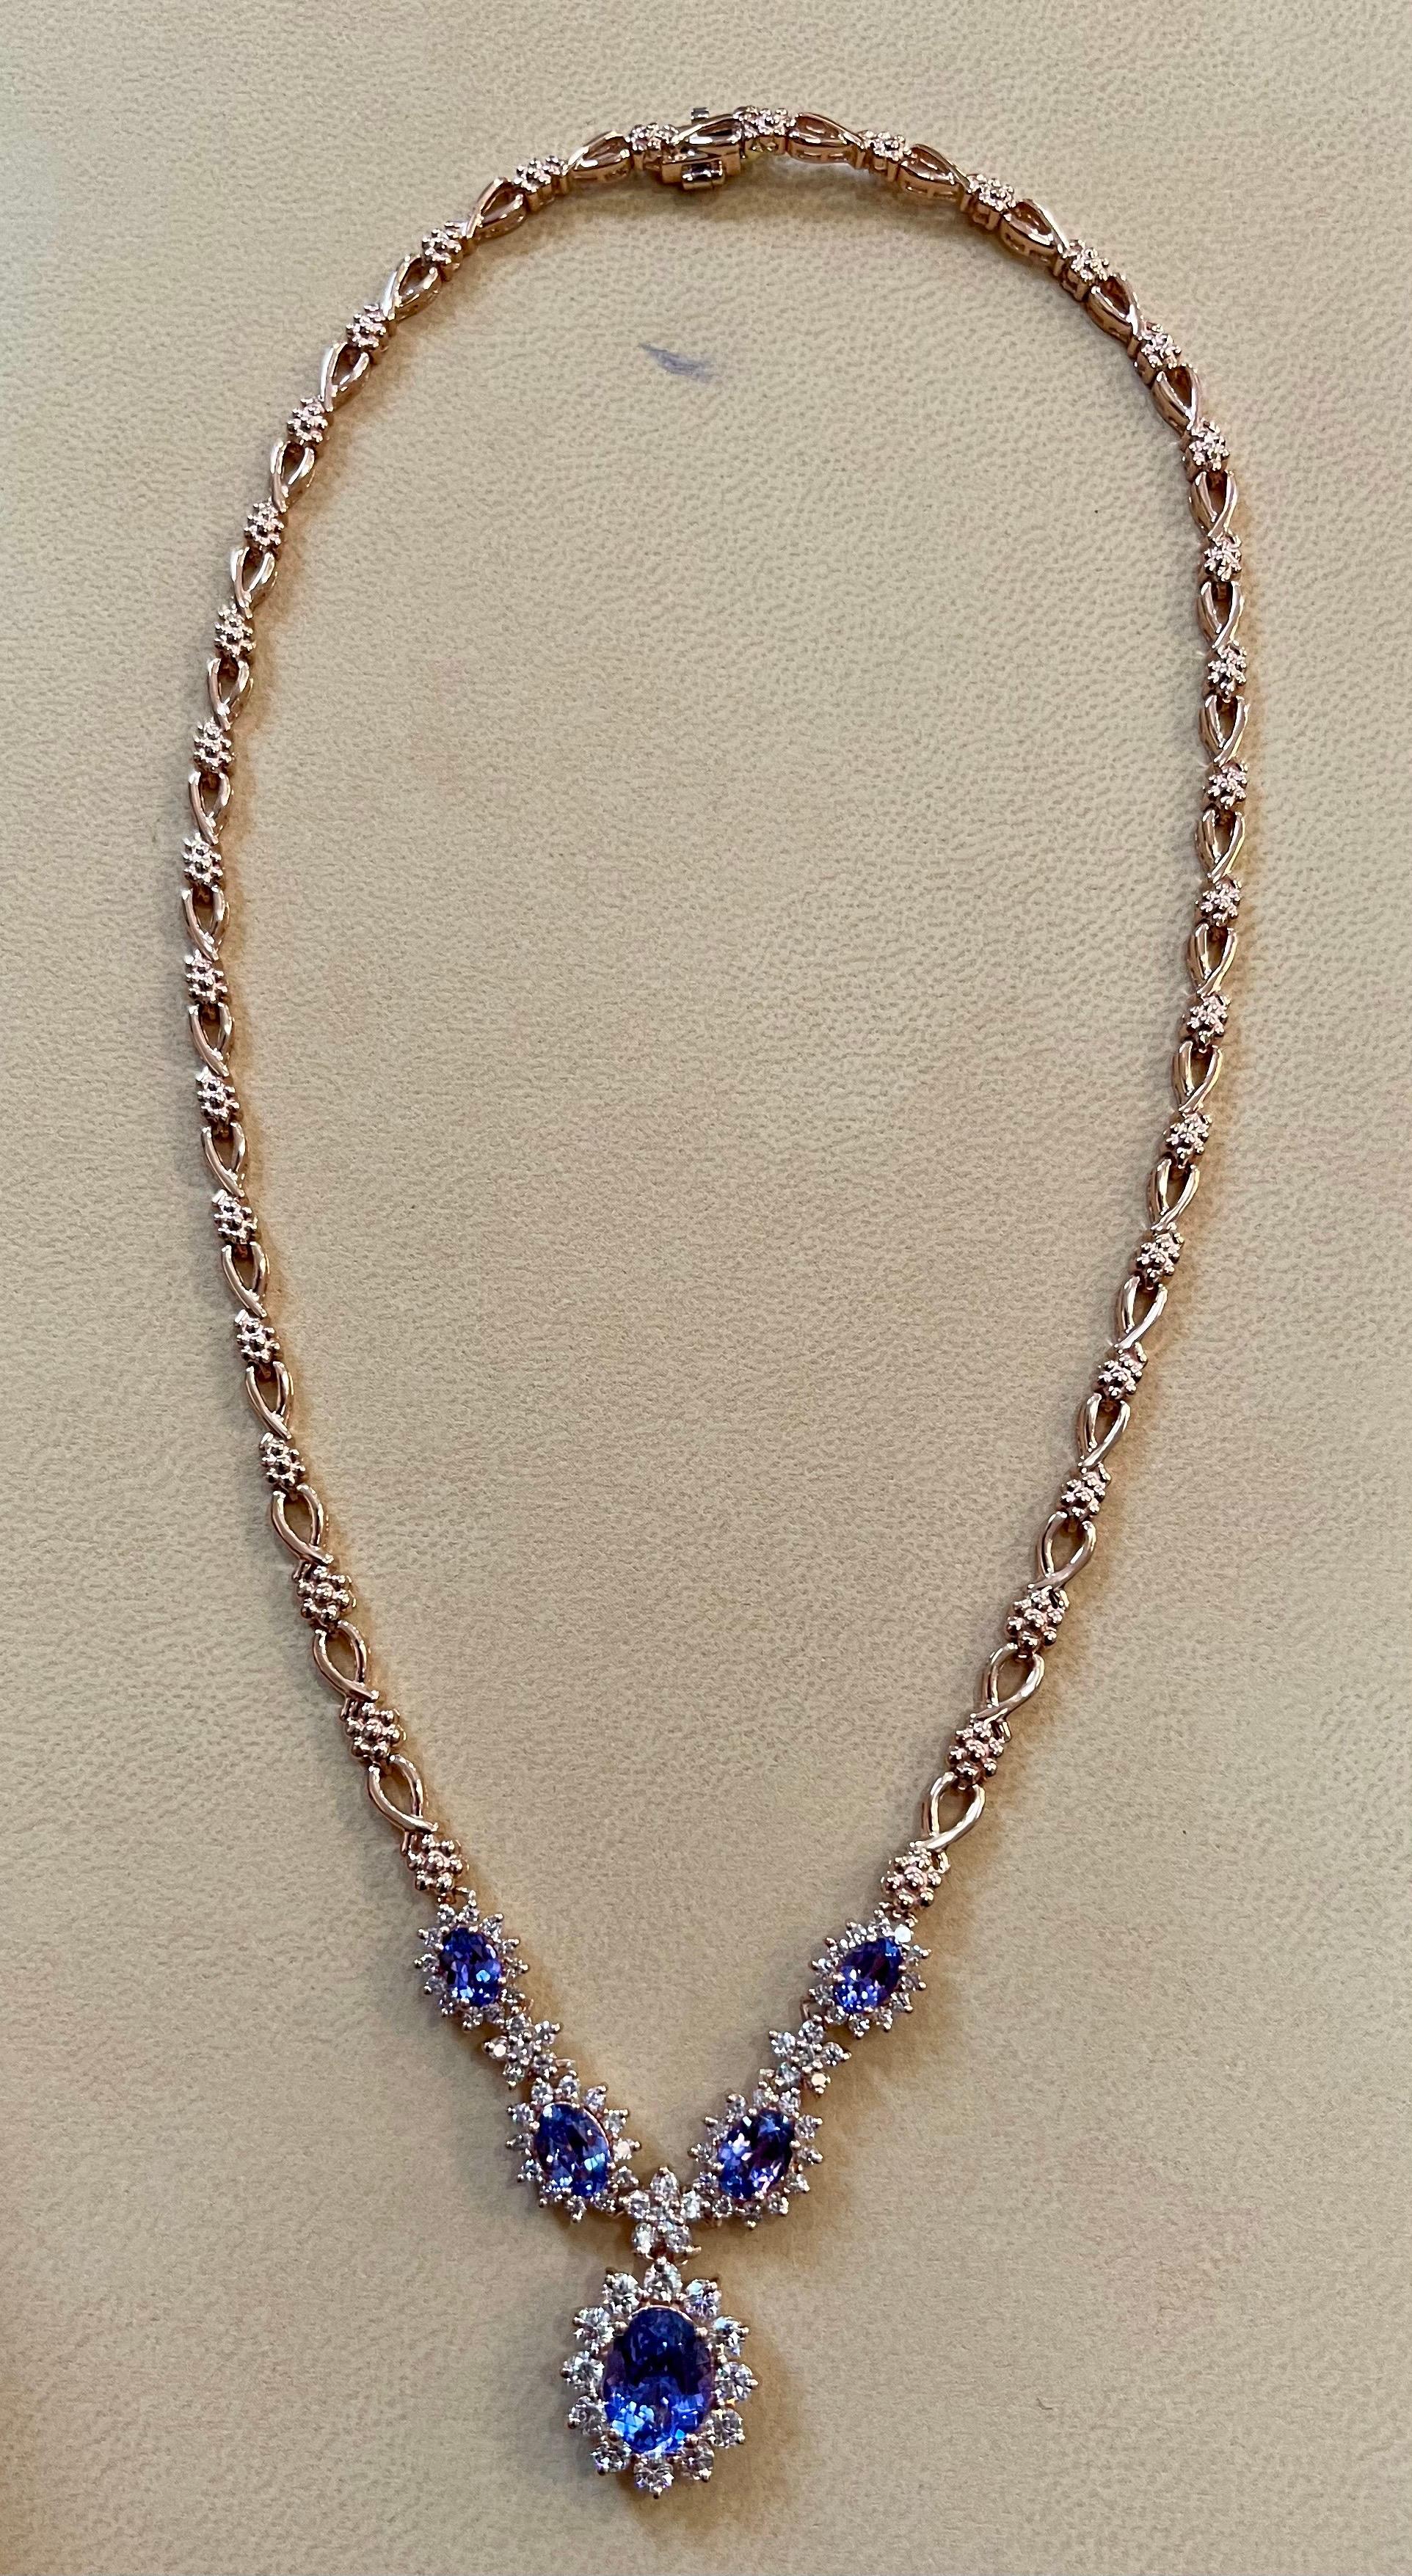 Effy's 5.5 Ct Oval Shape Natural Tanzanite  & 2.2 Ct Diamond Necklace 14K Rose Gold
 Oval shape Tanzanite  is surrounded by brilliant cut diamonds .
The Necklace is made with Brilliant   round cut diamond flowers alternating with a oval shape